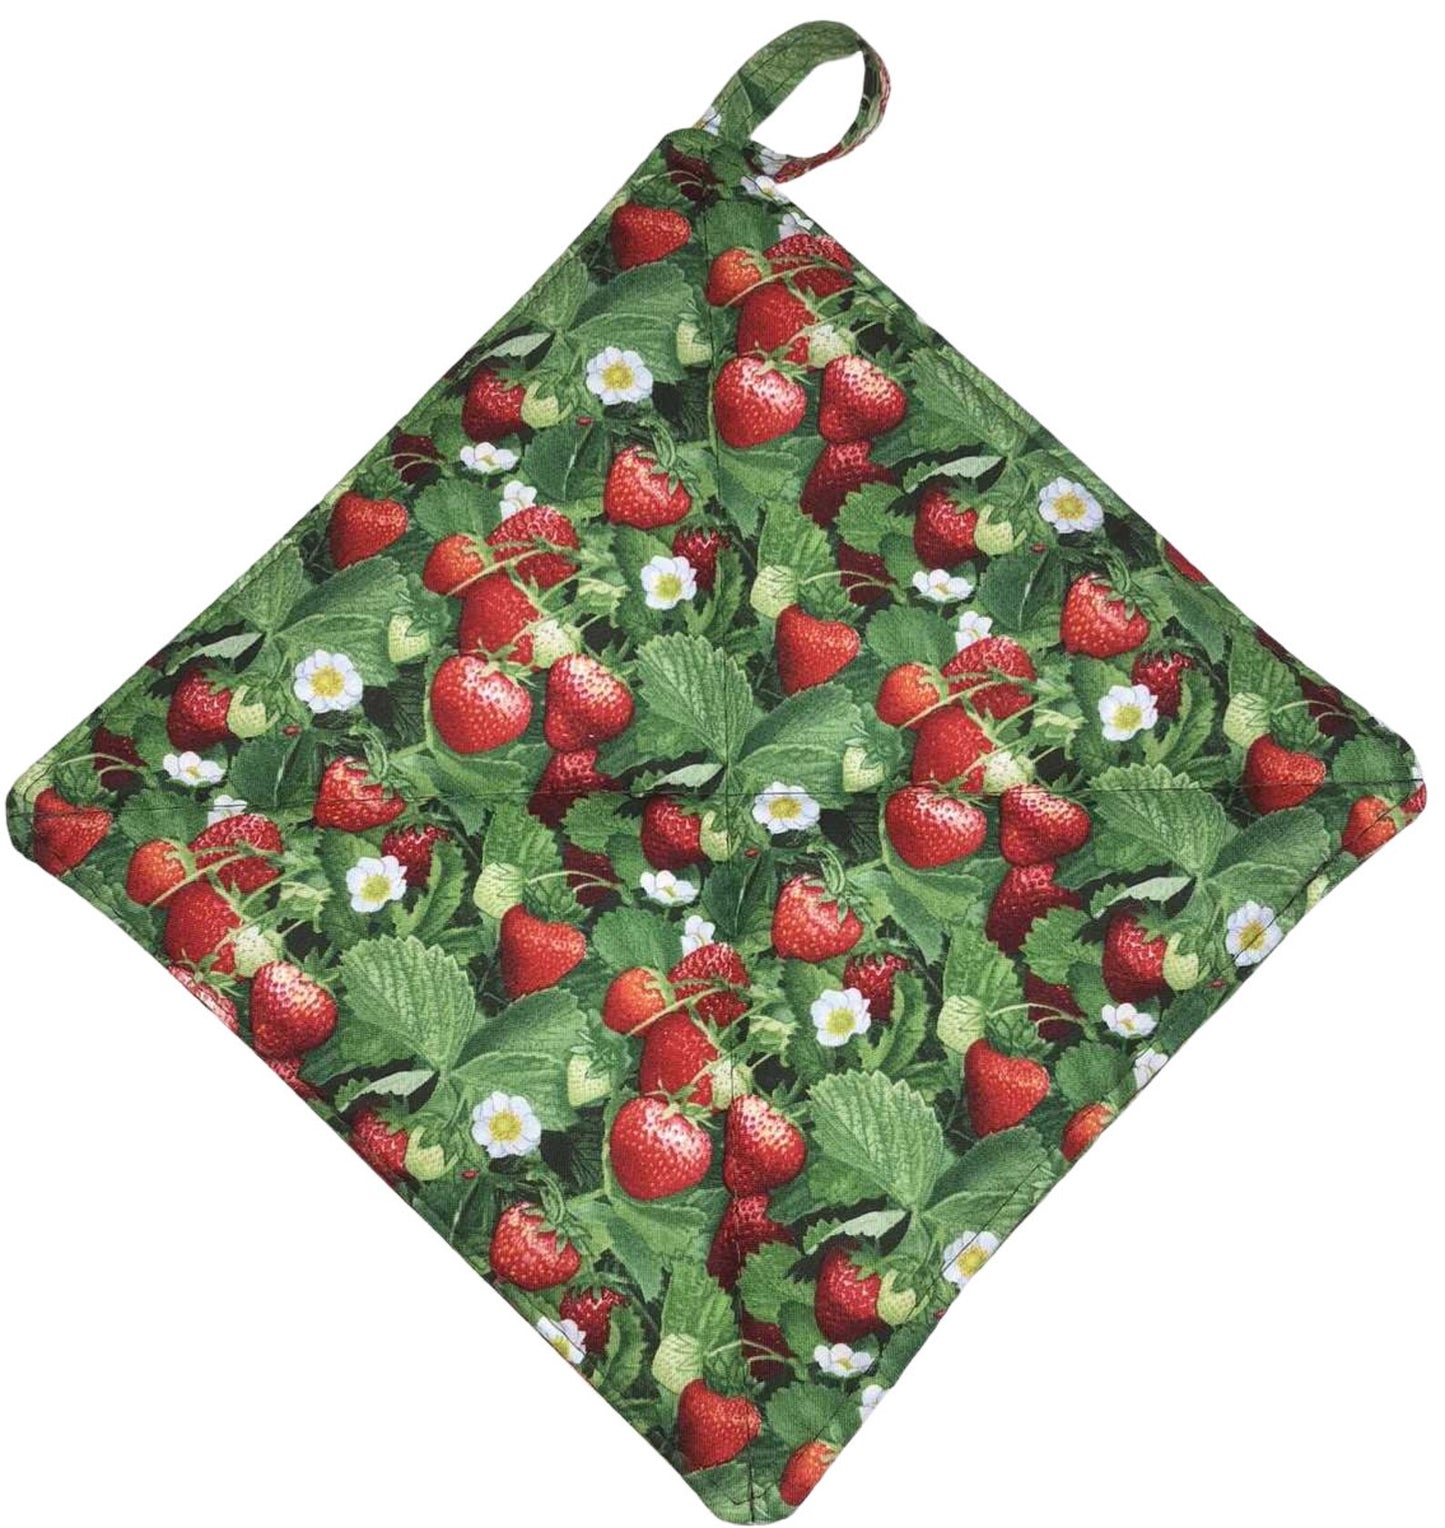 Strawberry Kitchen Pot Holder, Sweet Berry Farmhouse Thick Hot Pad, Red White Green Berries Pot Holder, Quilted Potholder